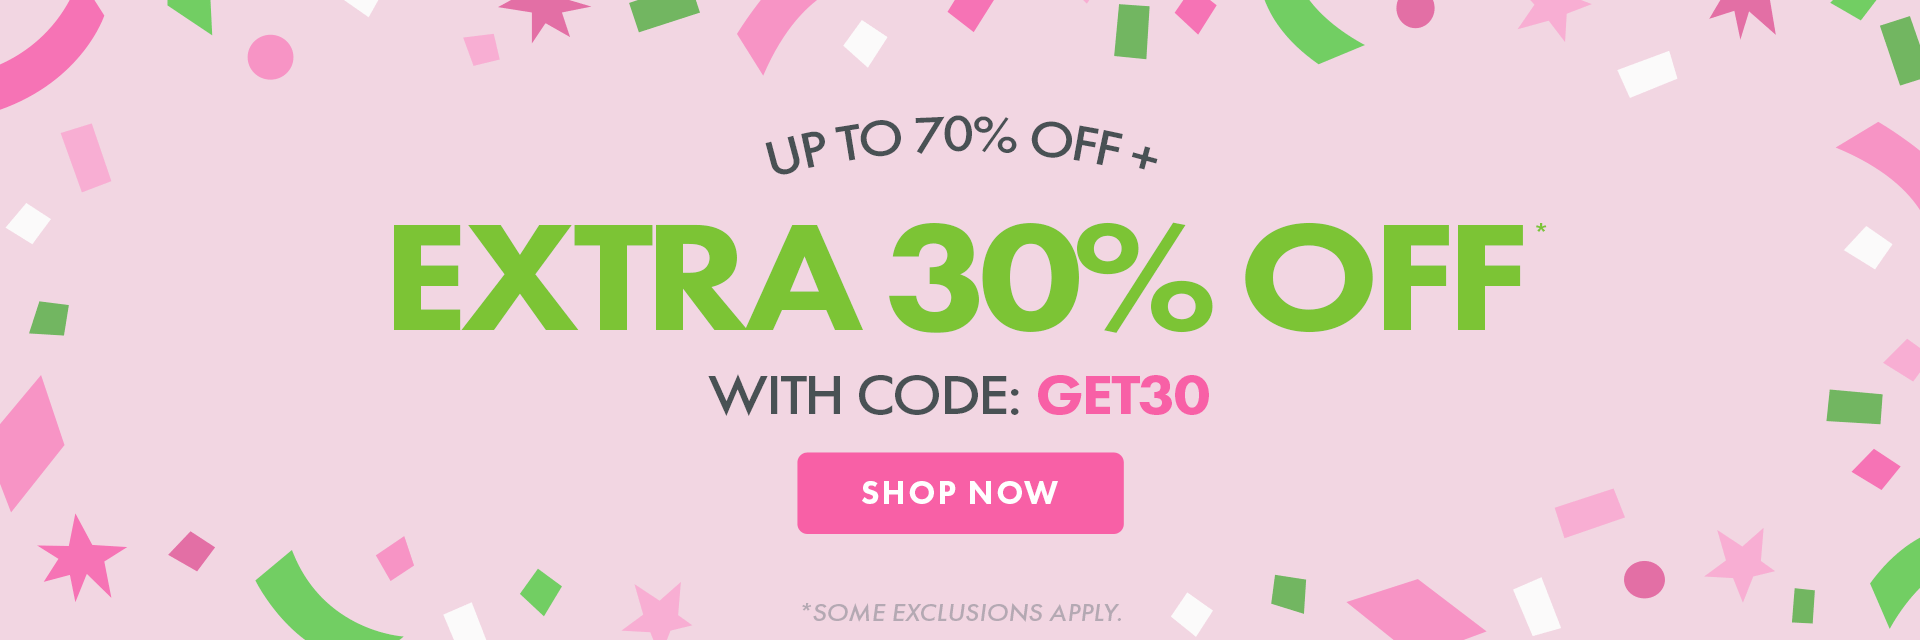 Save 30% Off with code: GET30